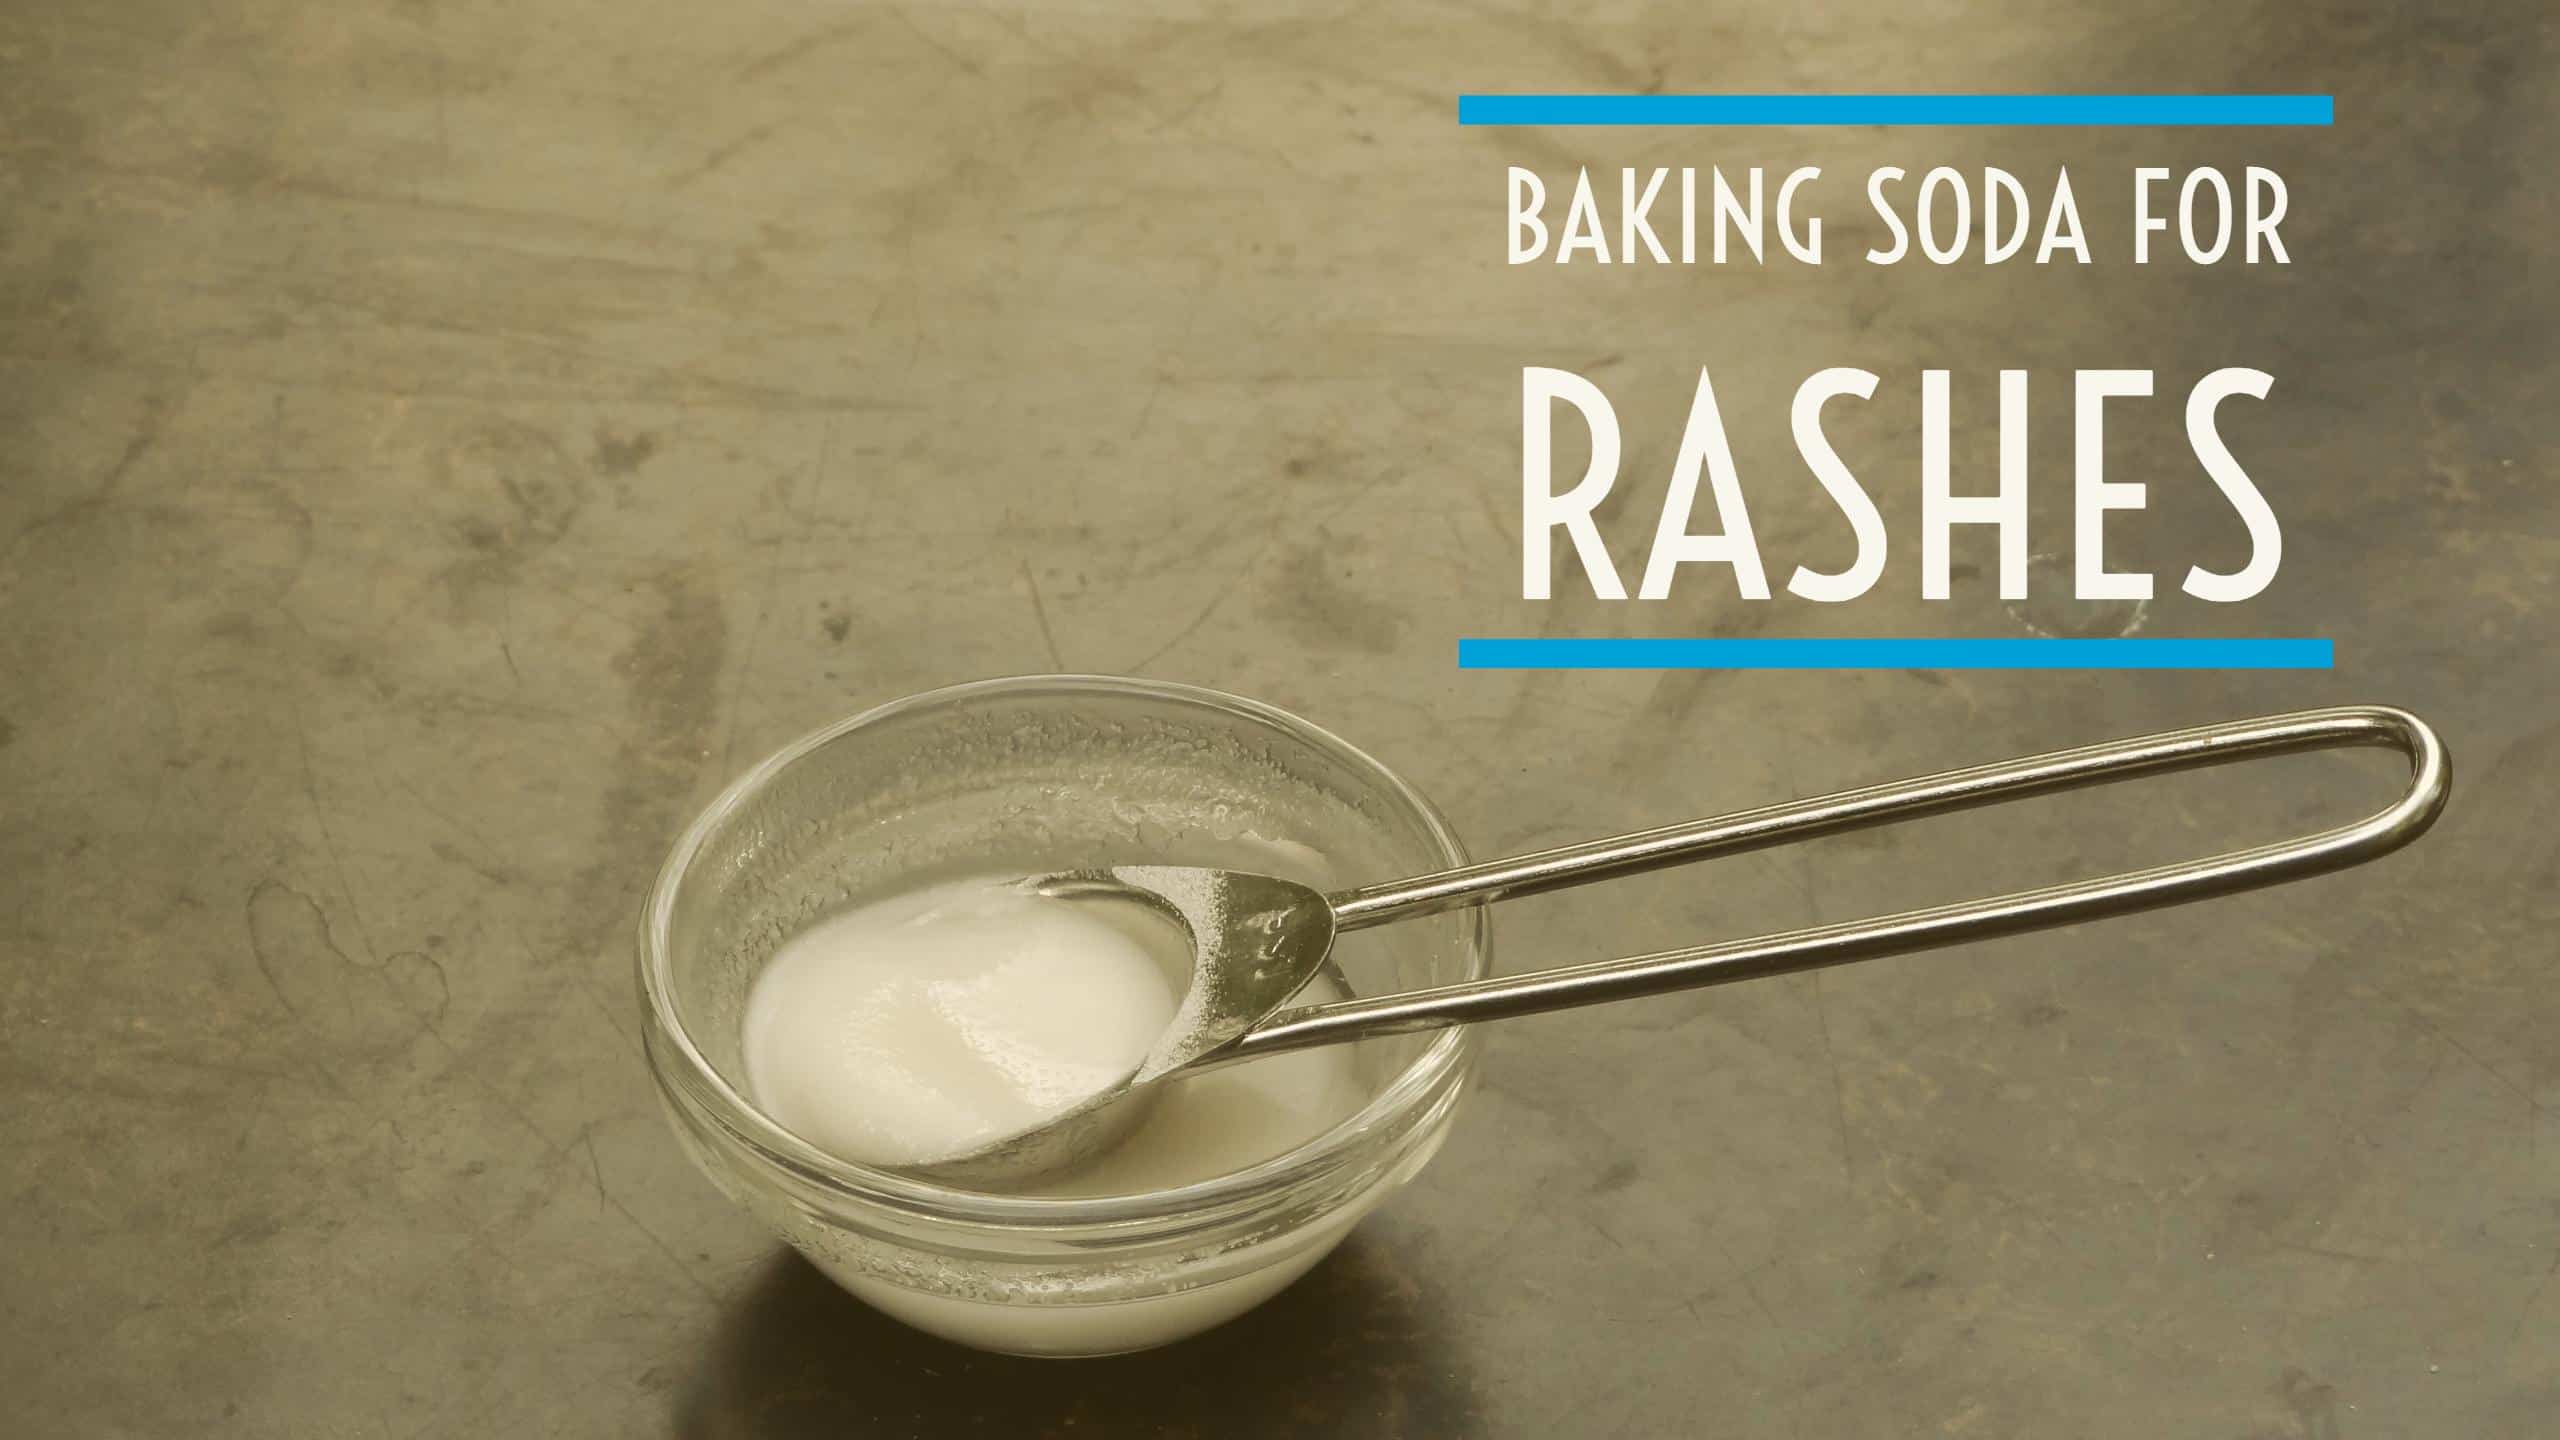 How to use Baking Soda for Rashes